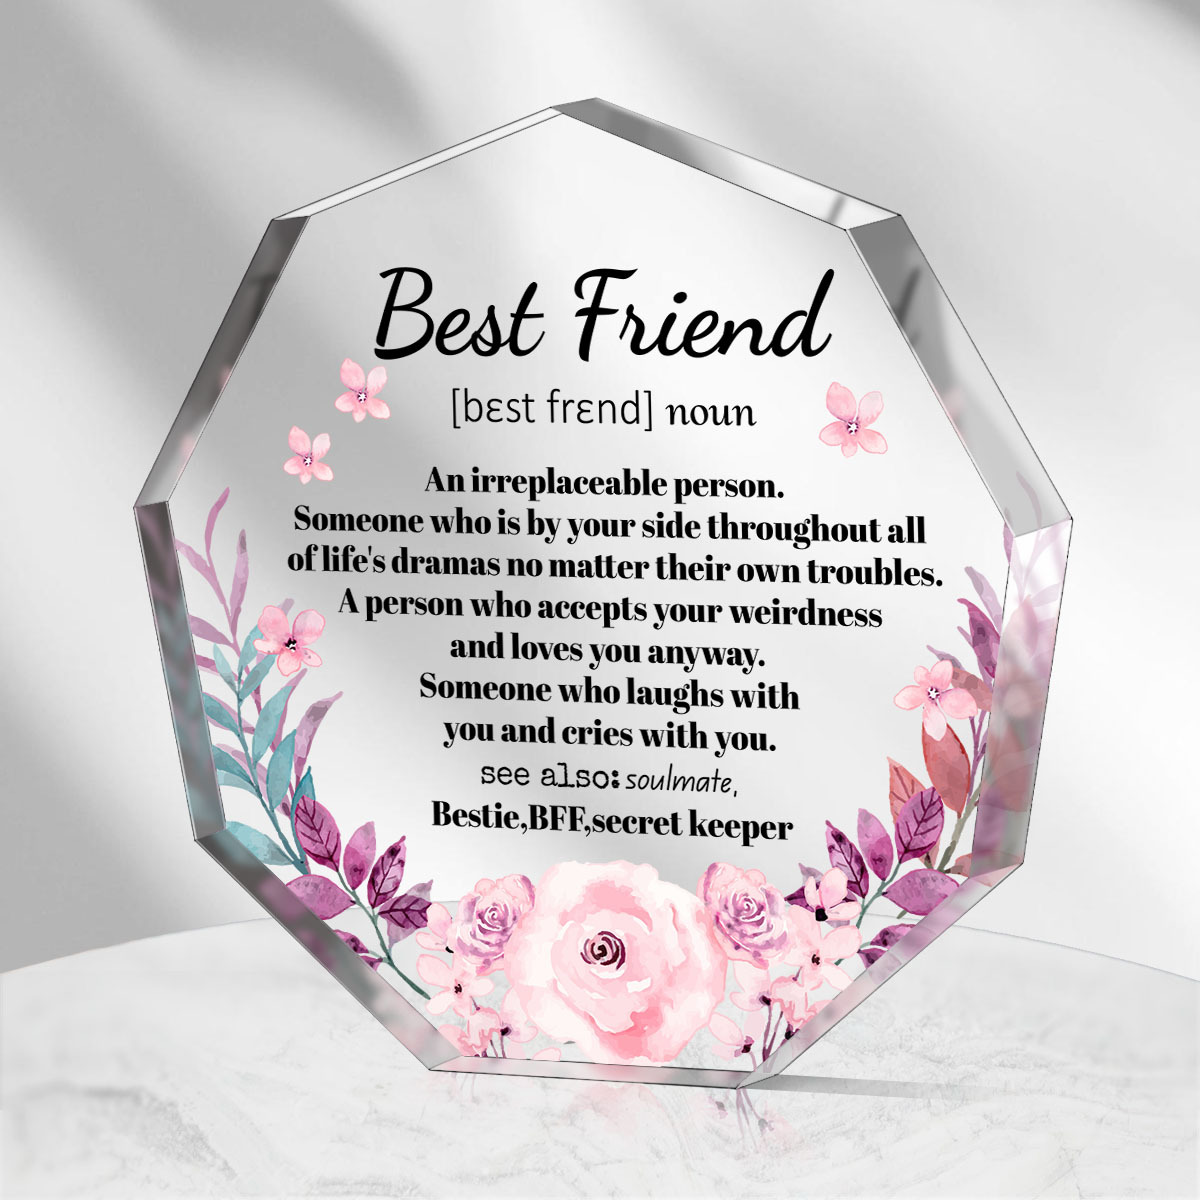 Birthday Gifts for Women, Friendship Gifts for Women Friends